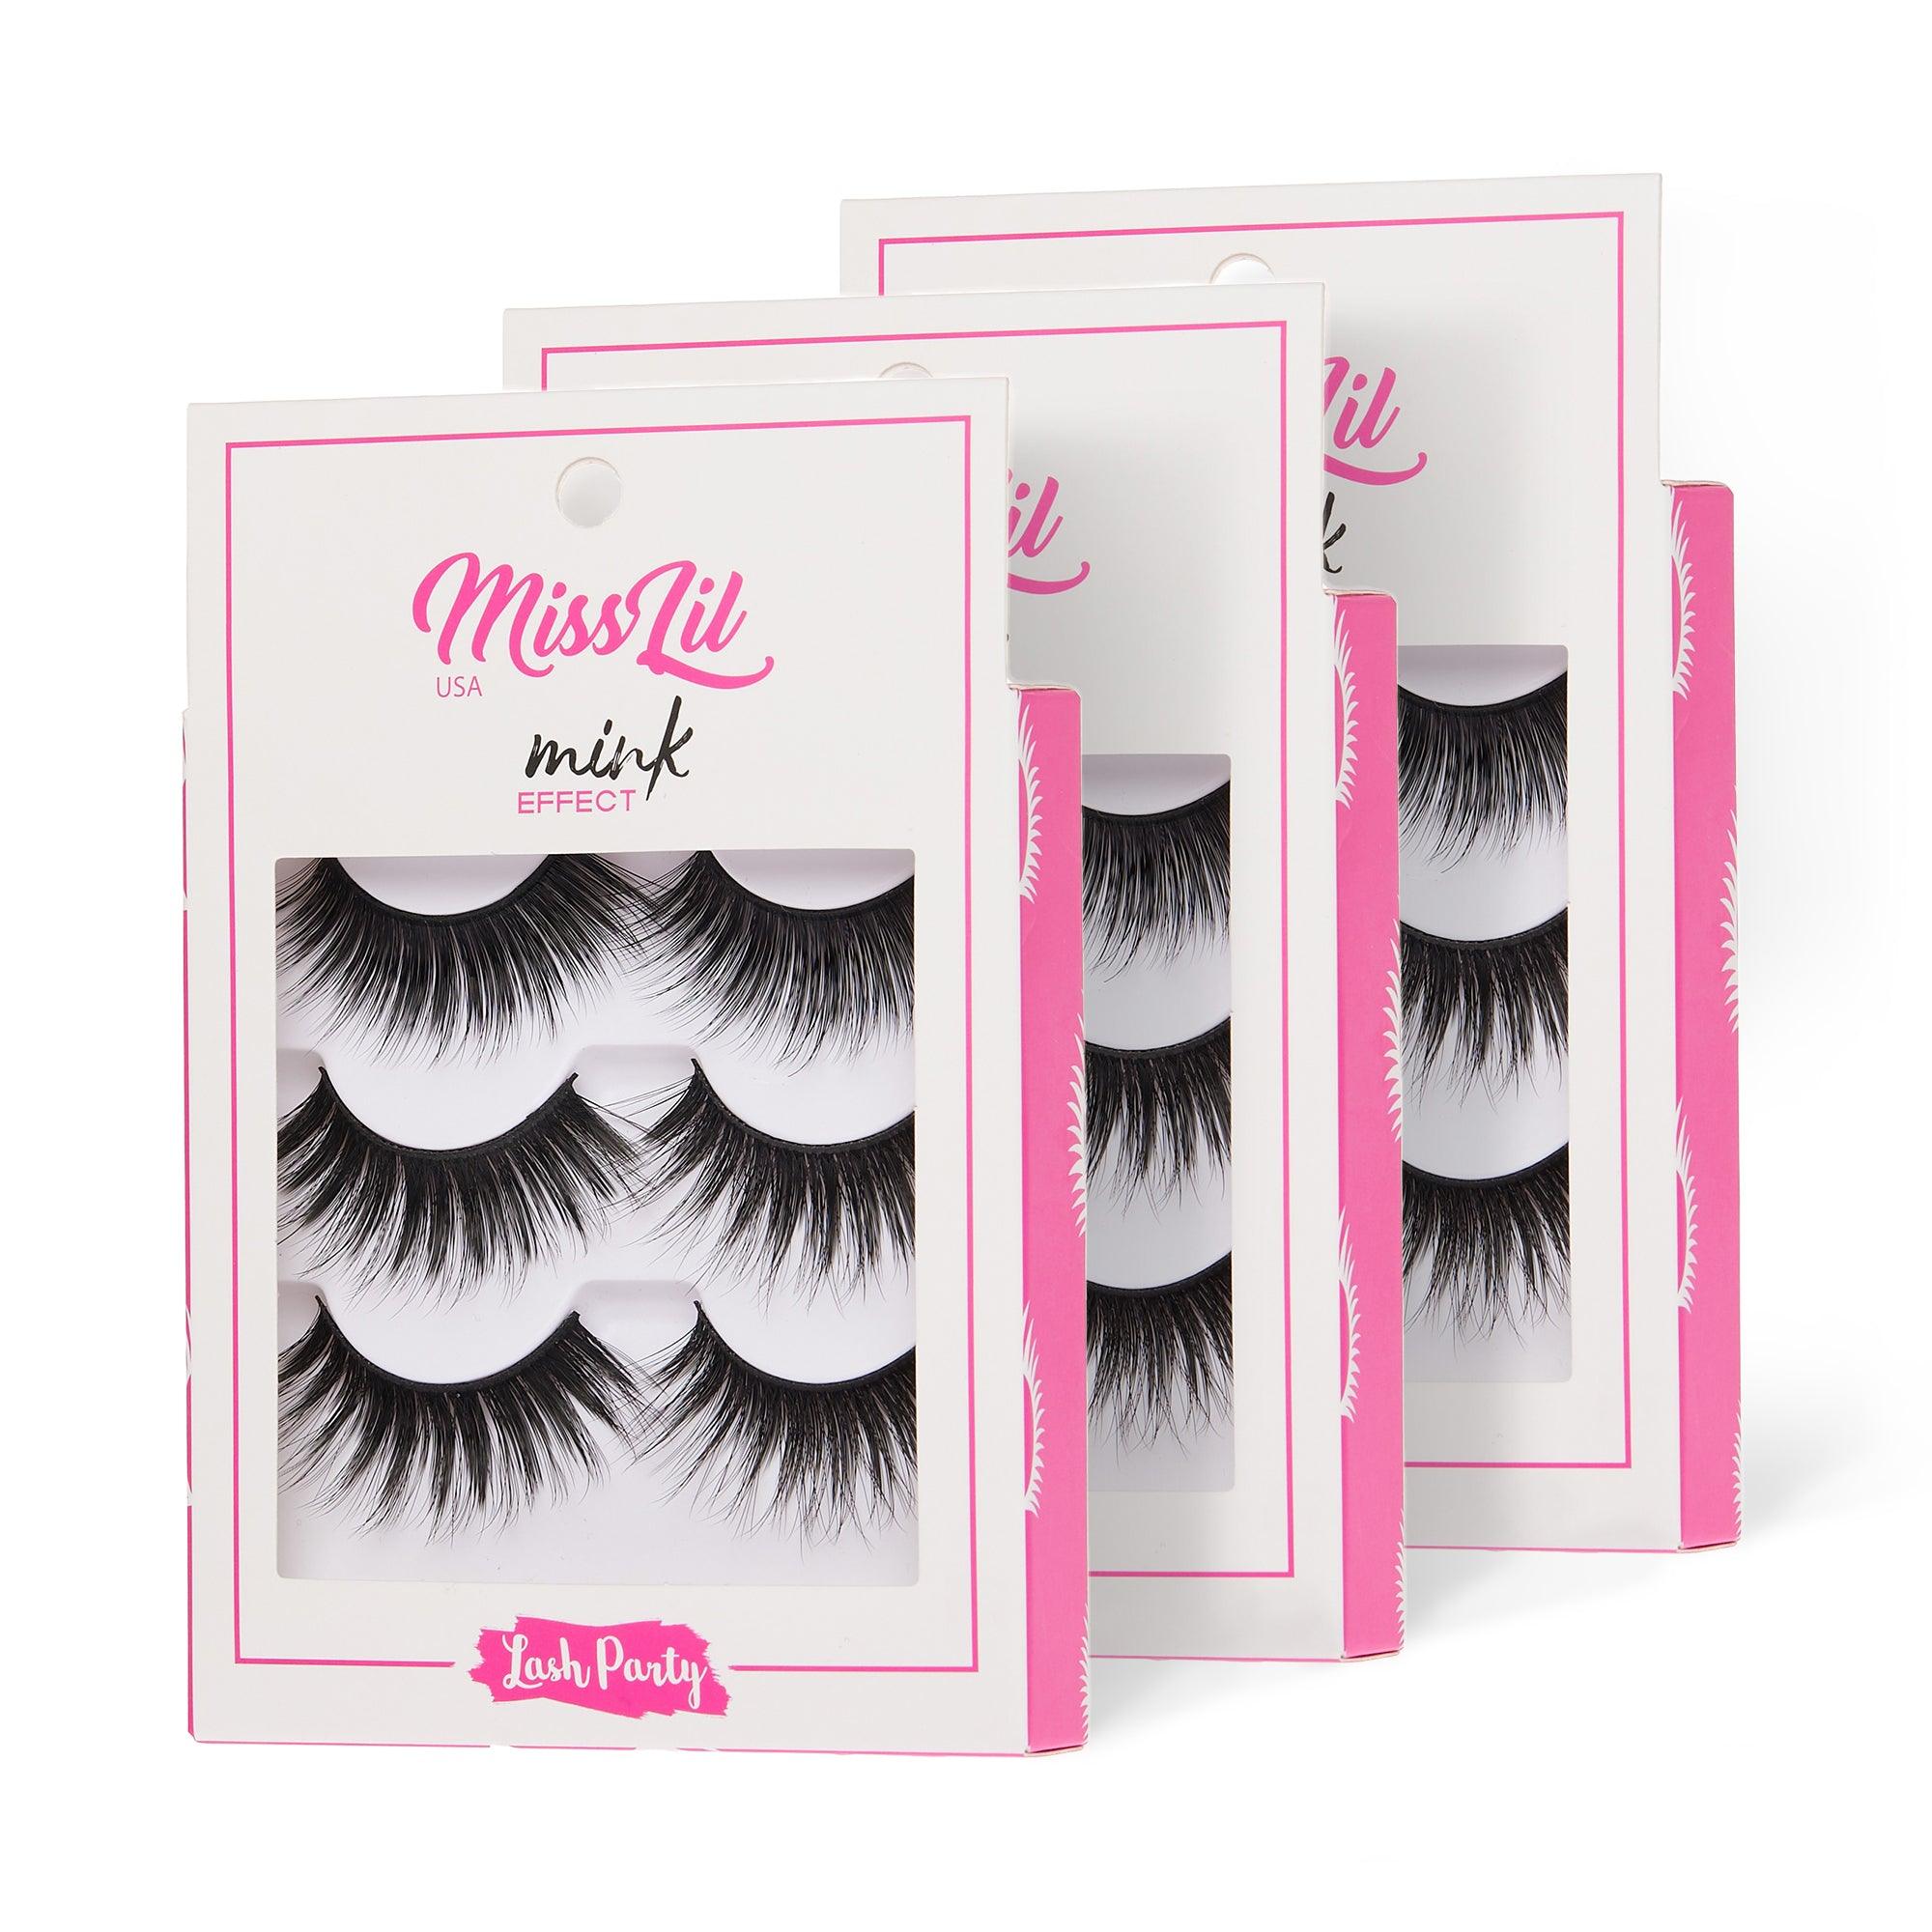 3-Pair Faux Mink Effect Eyelashes - Lash Party Collection #29 - Pack of 3 - Miss Lil USA